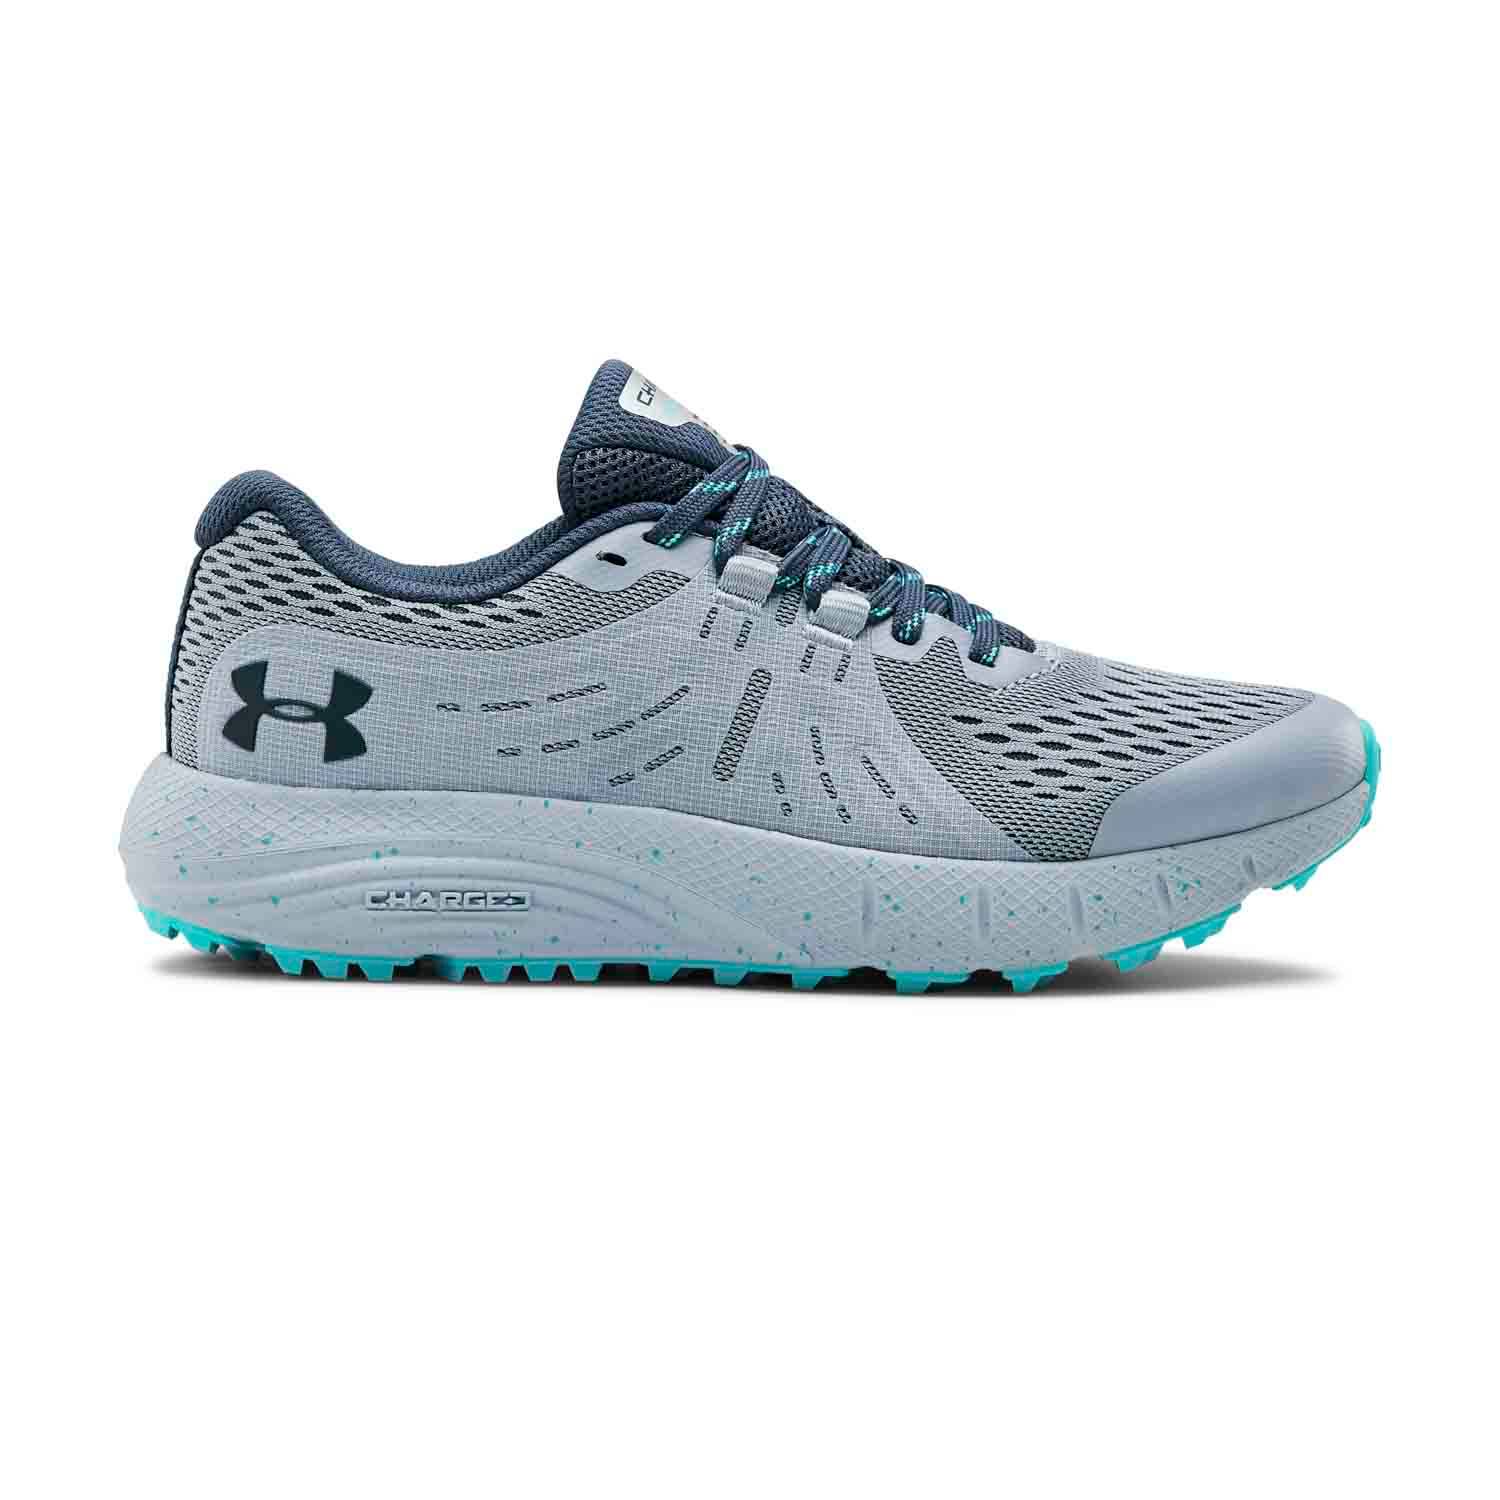 Under Armour Women's Charged Bandit Trail Running Shoes